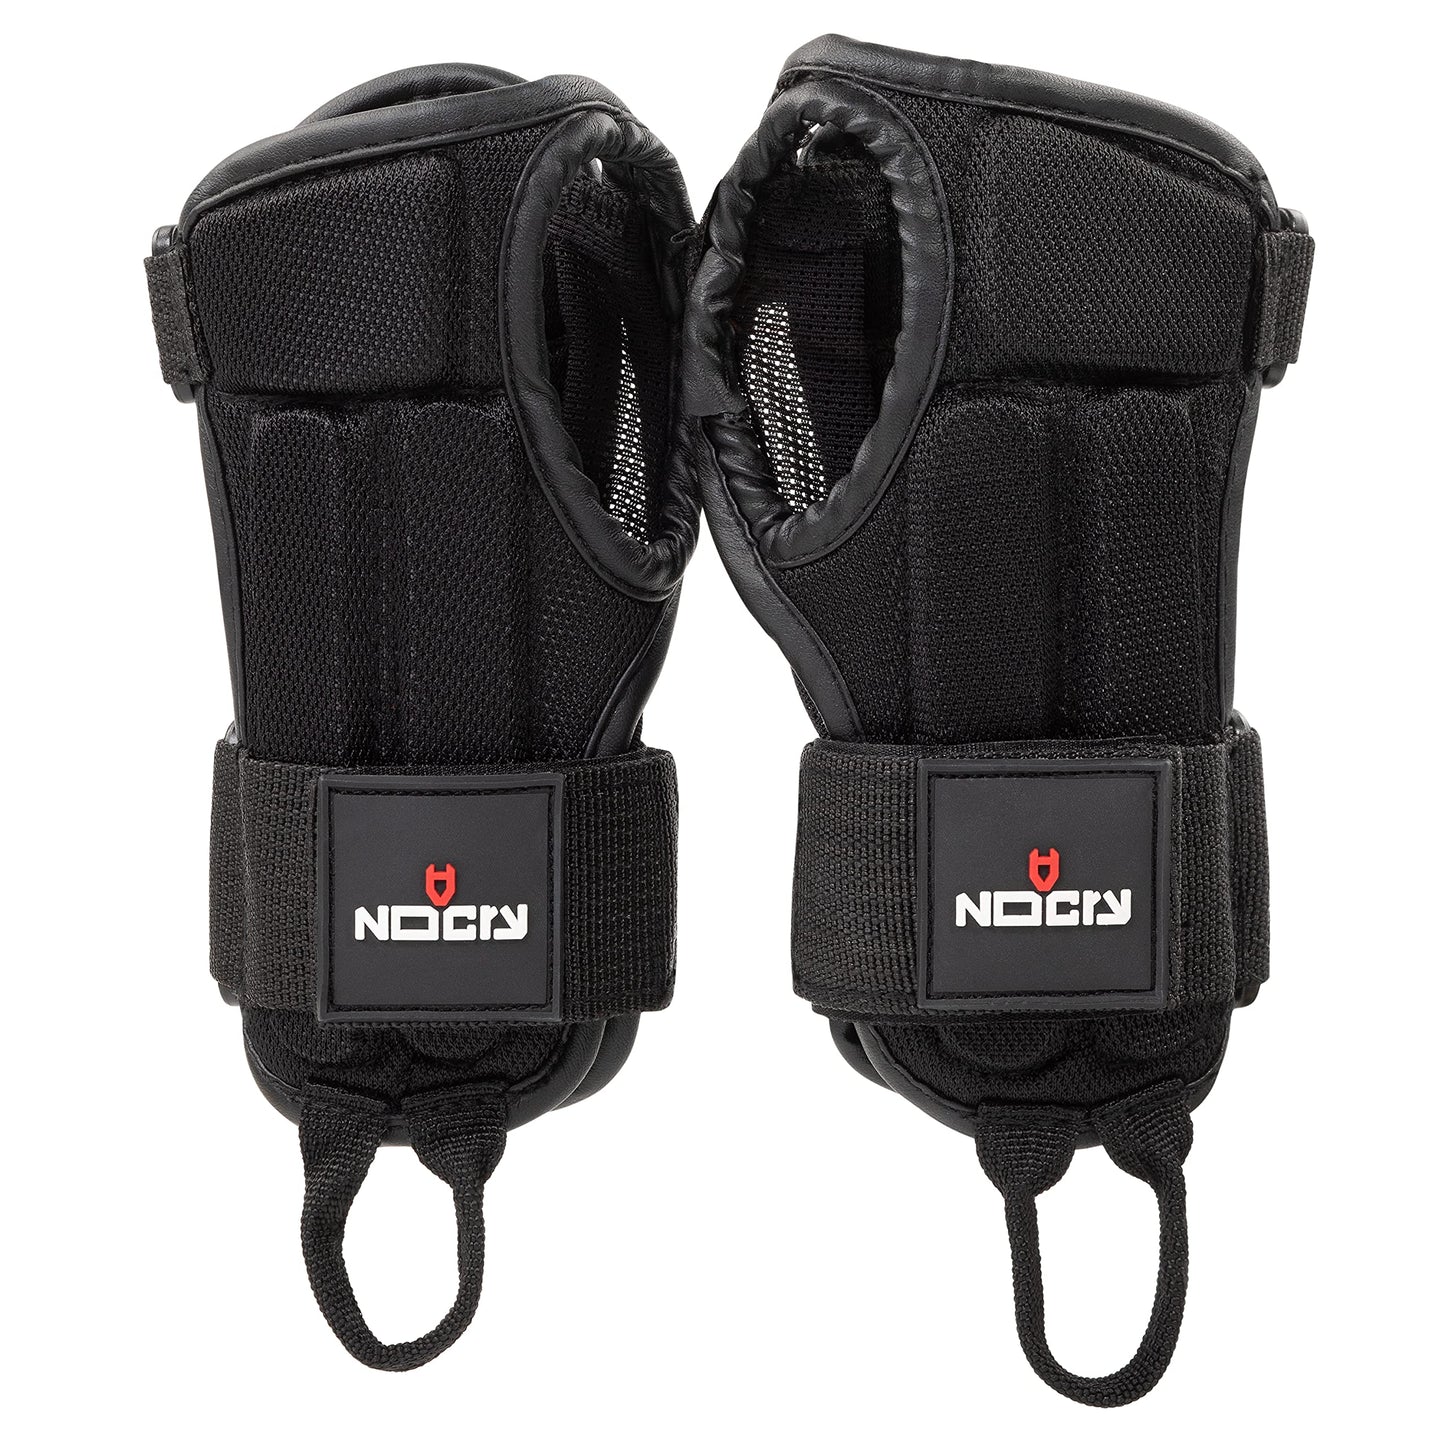 NoCry Wrist Brace; Protective and Lightweight Wrist Guards That Offer Soft Wrist Support for Carpal Tunnel